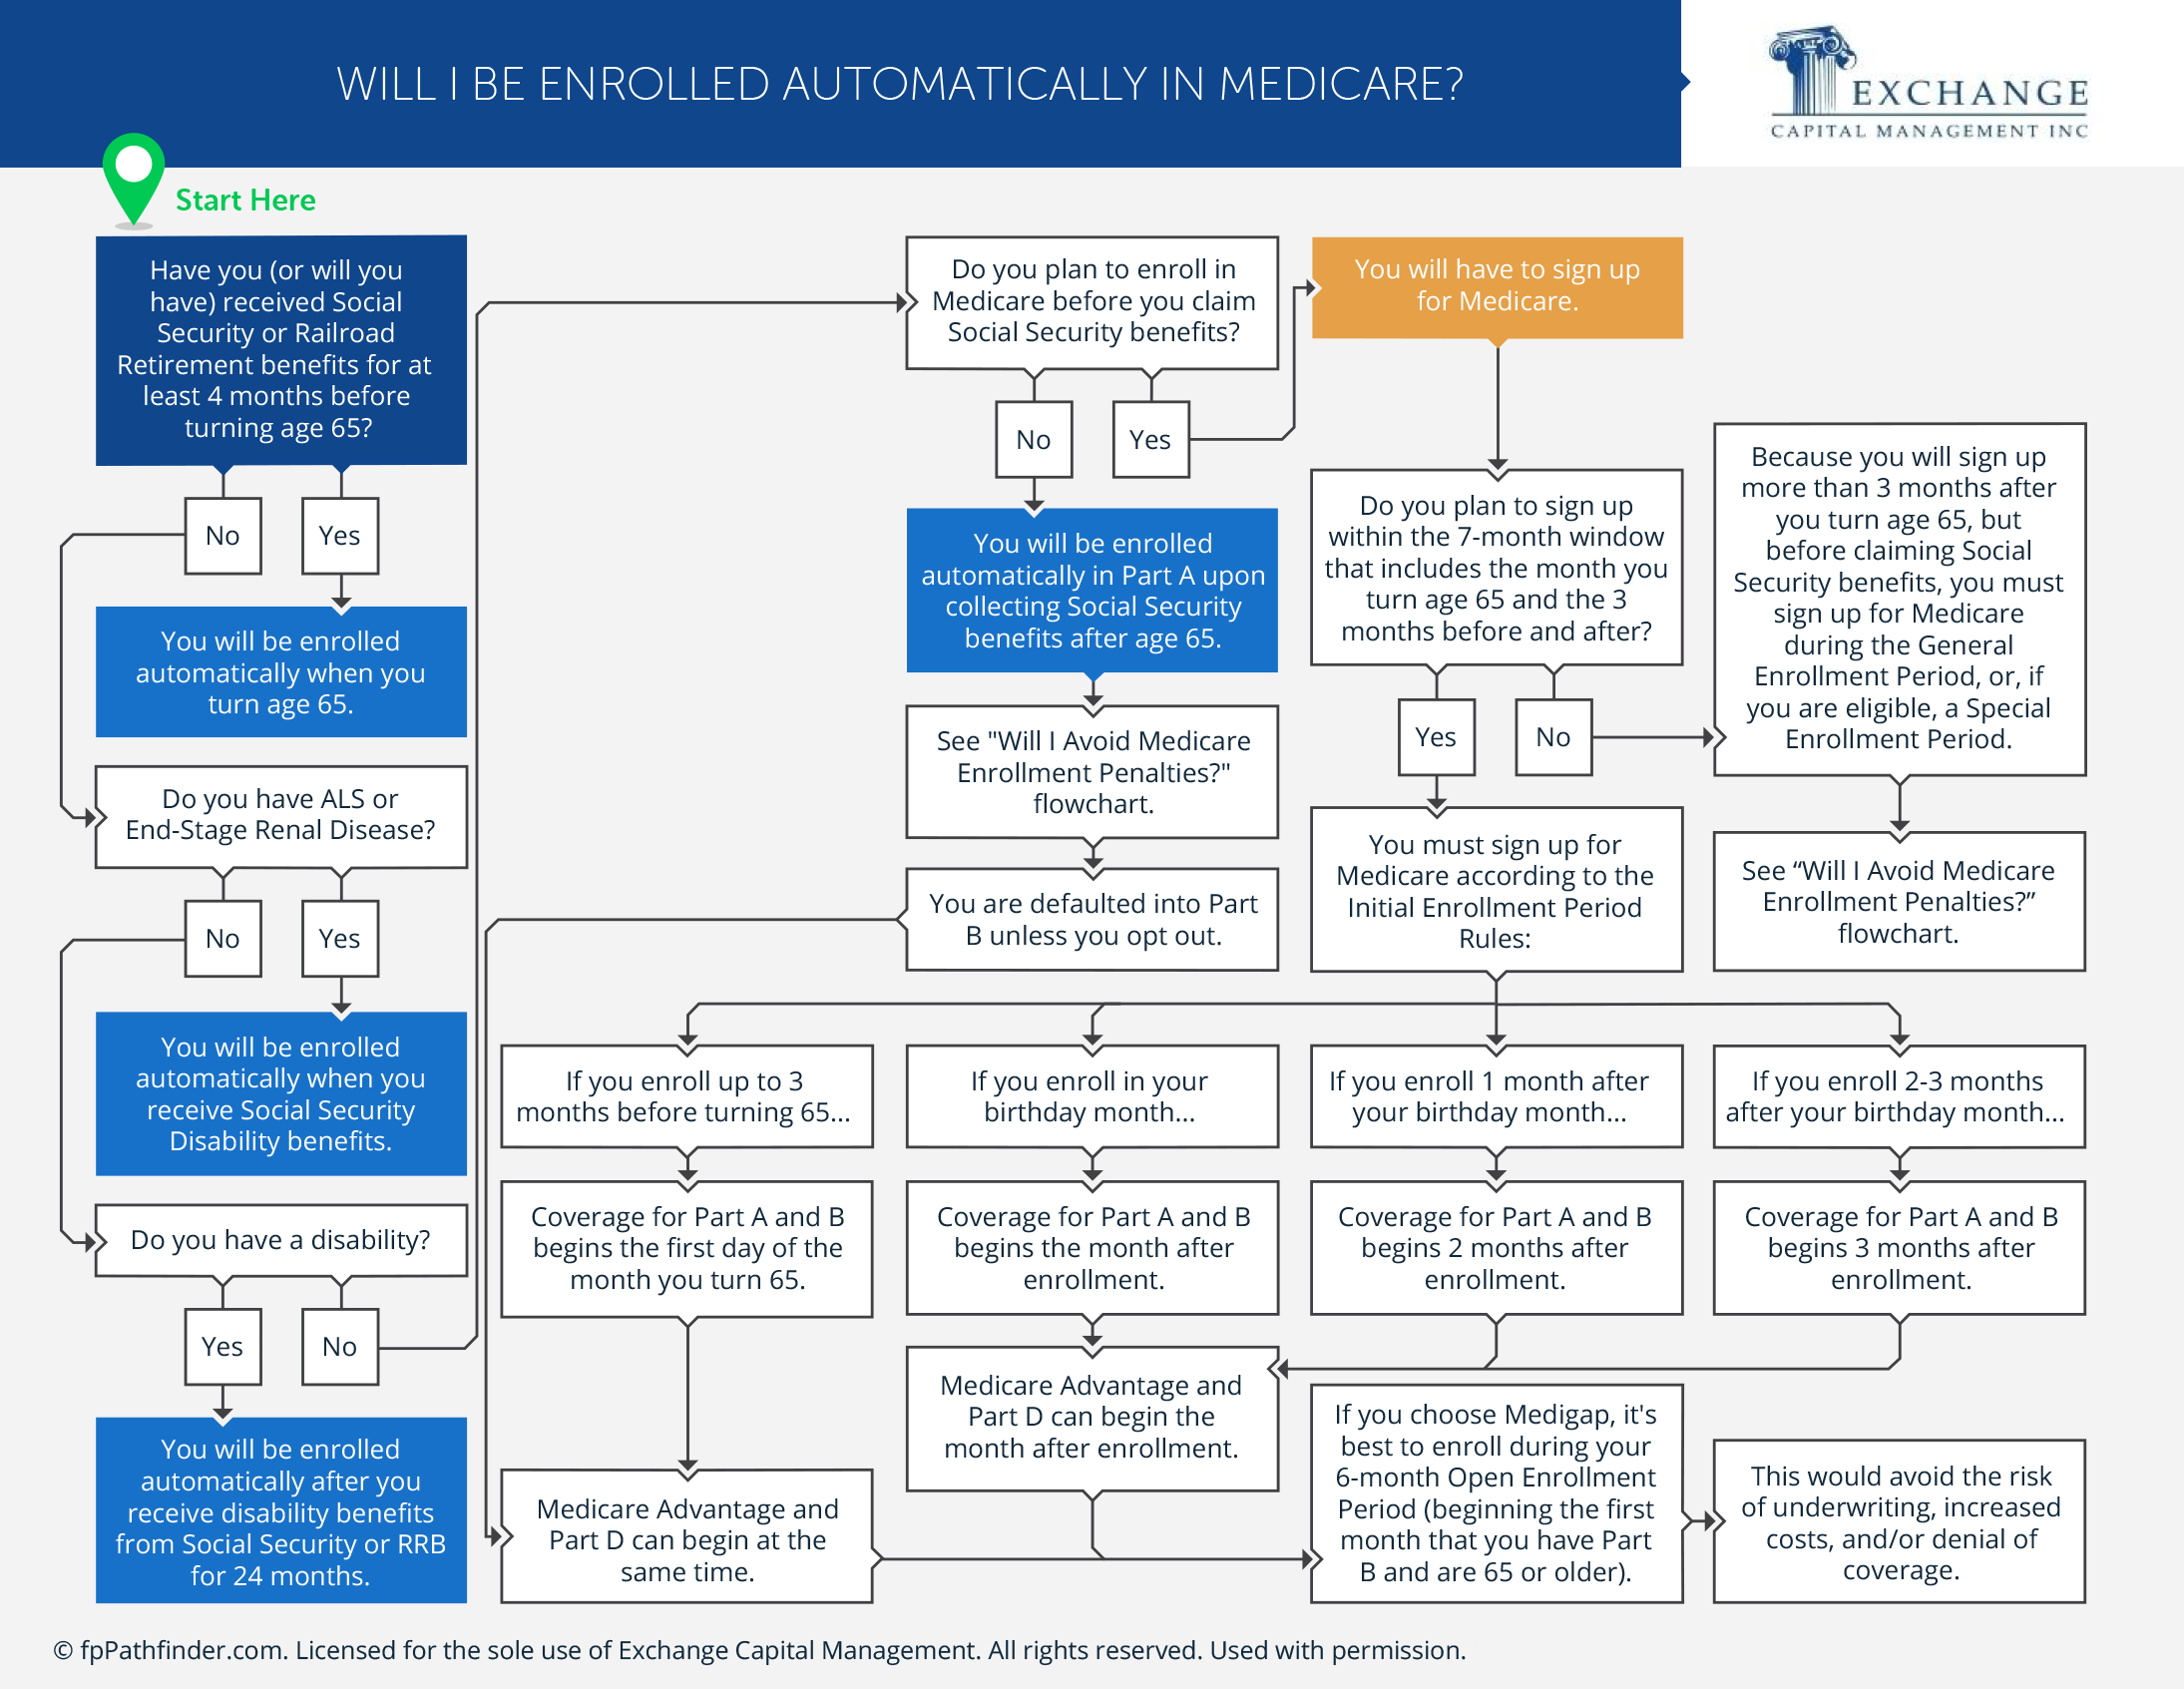 Will I Be Enrolled Automatically in Medicare?